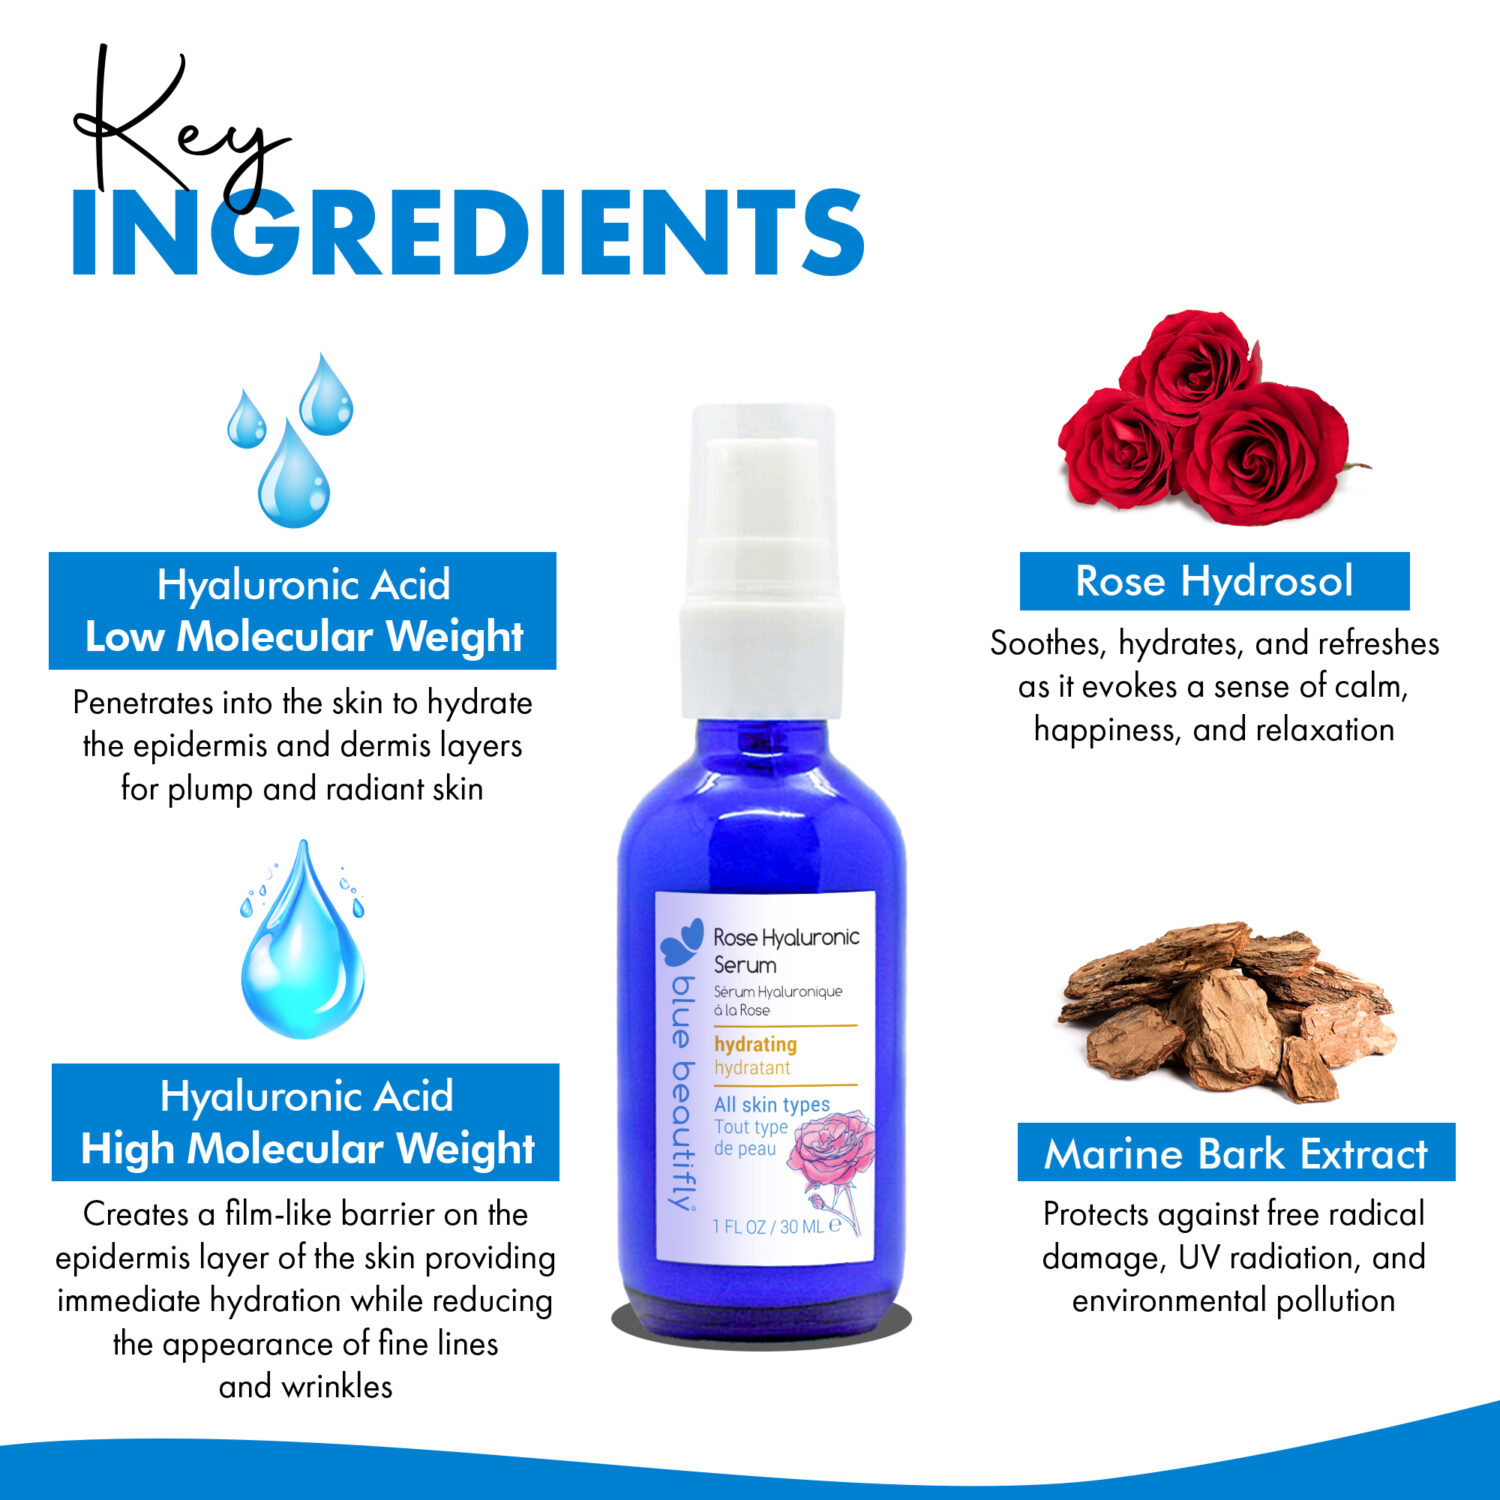 Blue Beautifly Rose Hyaluronic Serum Key ingredients are Low Molecular Weight Hyaluronic Acid, High Molecular Weight Hyaluronic Acid, Rose Hydrosol, and Marine Bark Extract